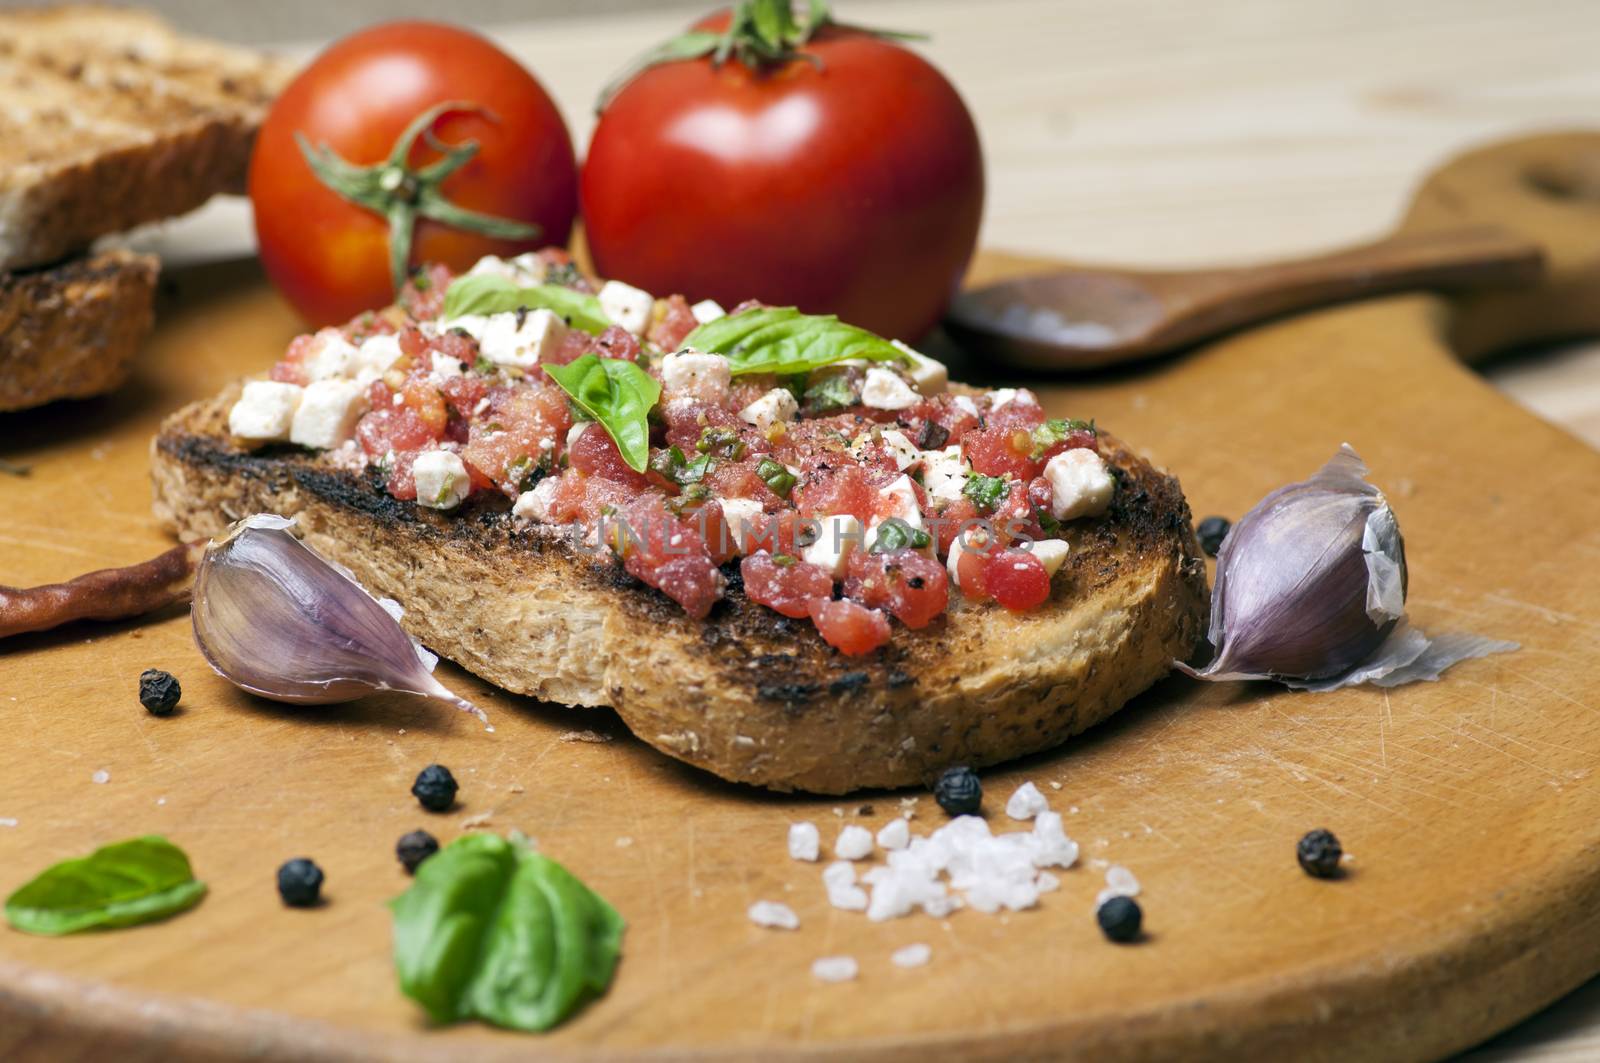 Italian bruschetta topped with tomatoes, basil and goat (feta) cheese